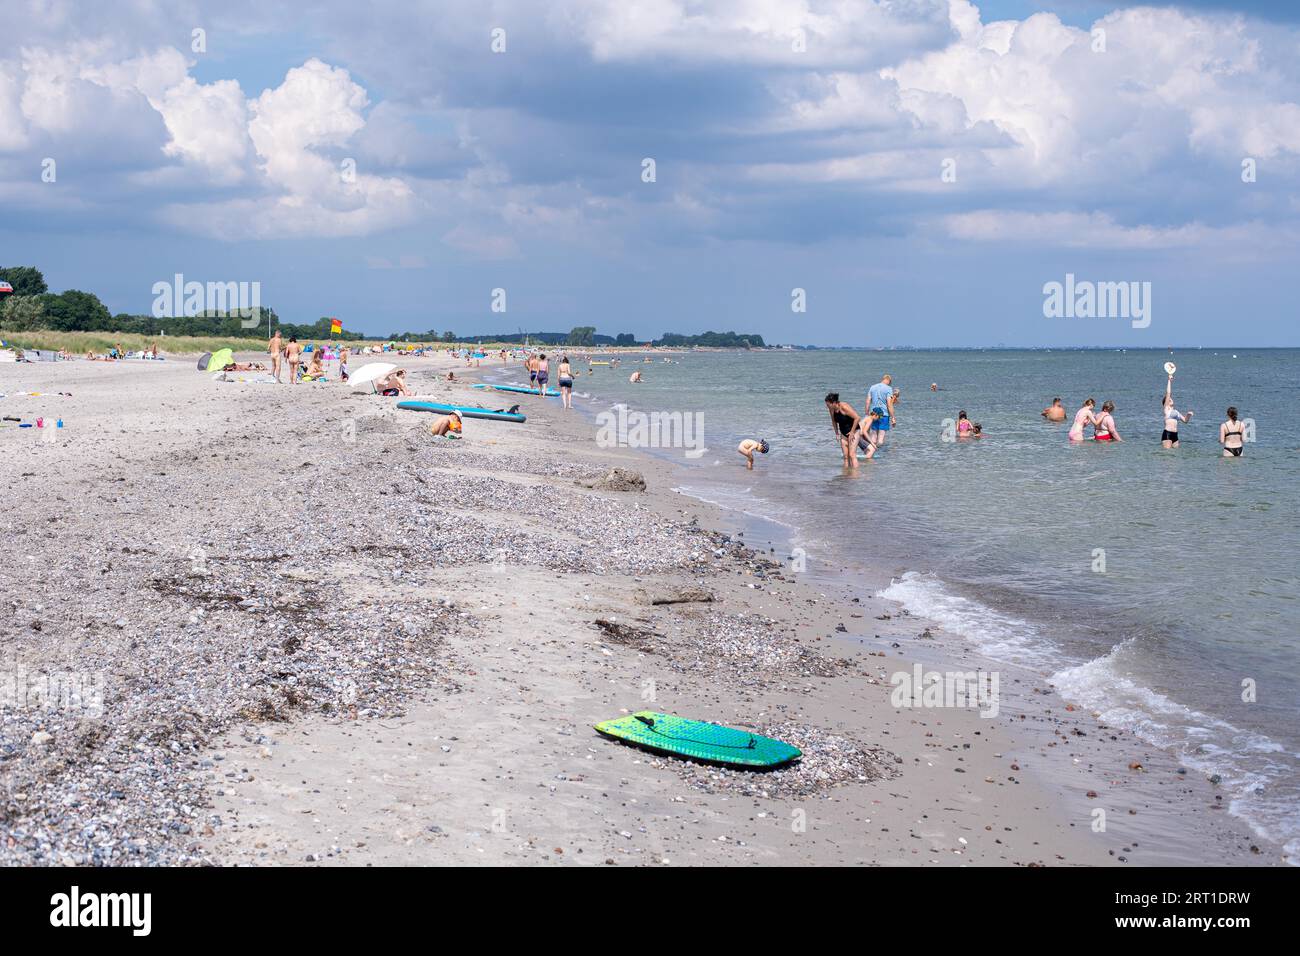 Dahme, Germany, July 27, 2021: People enjoying the summer at the beach Stock Photo